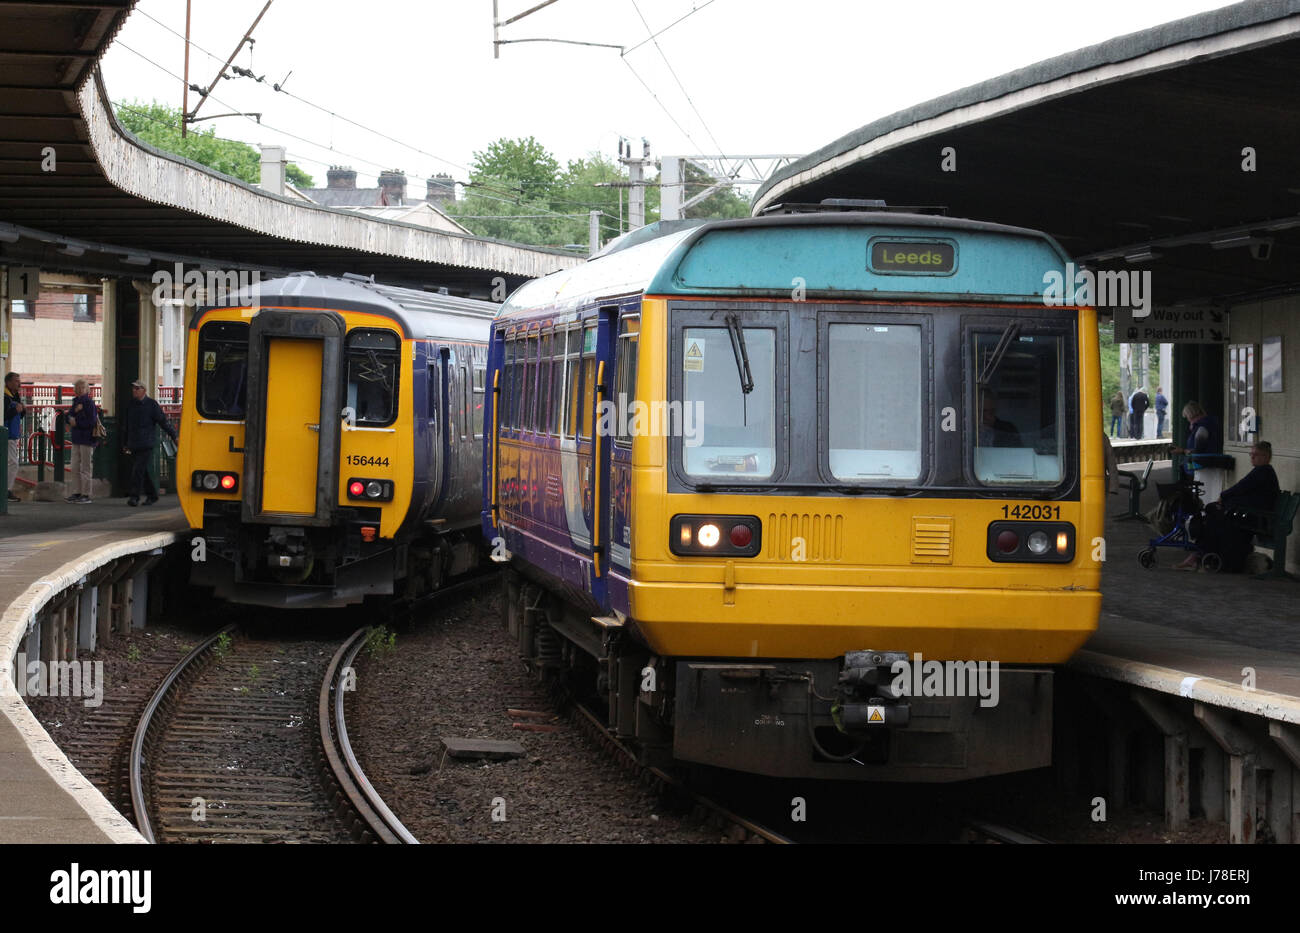 Two diesel multiple units in Carnforth station, one class 156 super sprinter and one Class 142 pacer, both operated by Arrive Trains North (Northern). Stock Photo